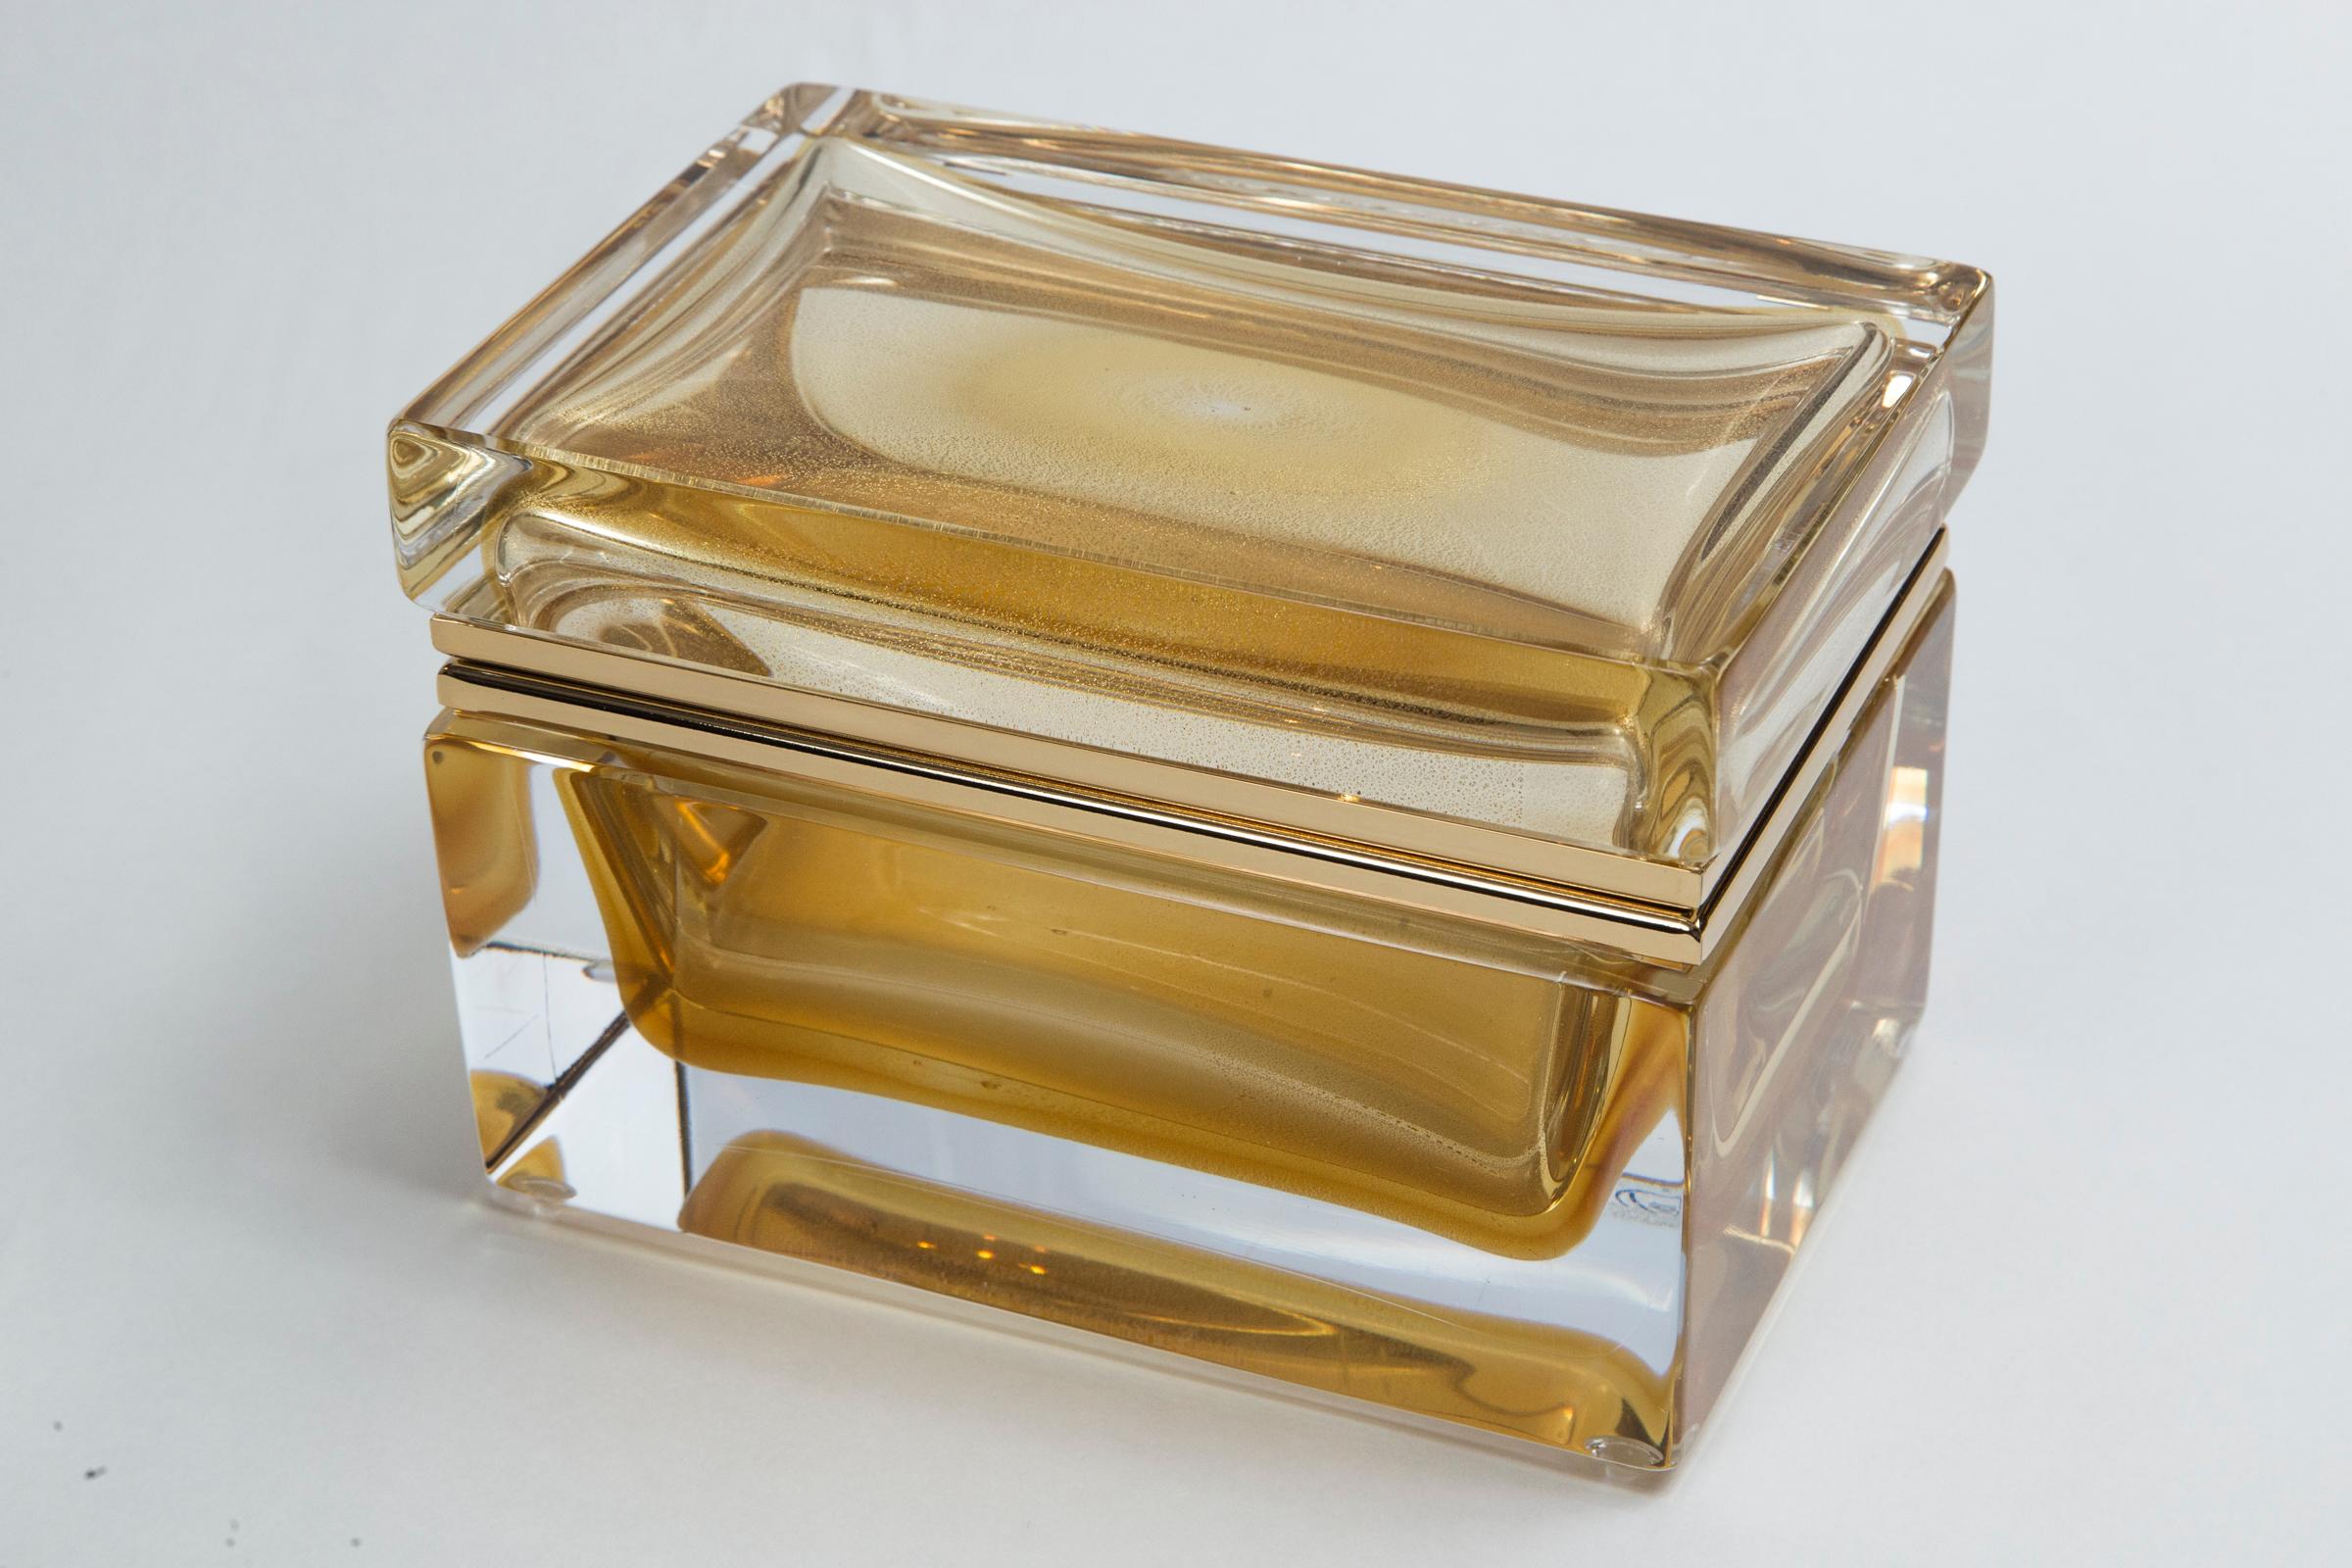 One of a kind Murano handcrafted large rectangular shaped clear blown glass box with floating 24-karat gold orb center, customized sizing for each box with 14-karat gold on brass fittings.
Boxes are signed by the artist.
Origin: Murano,